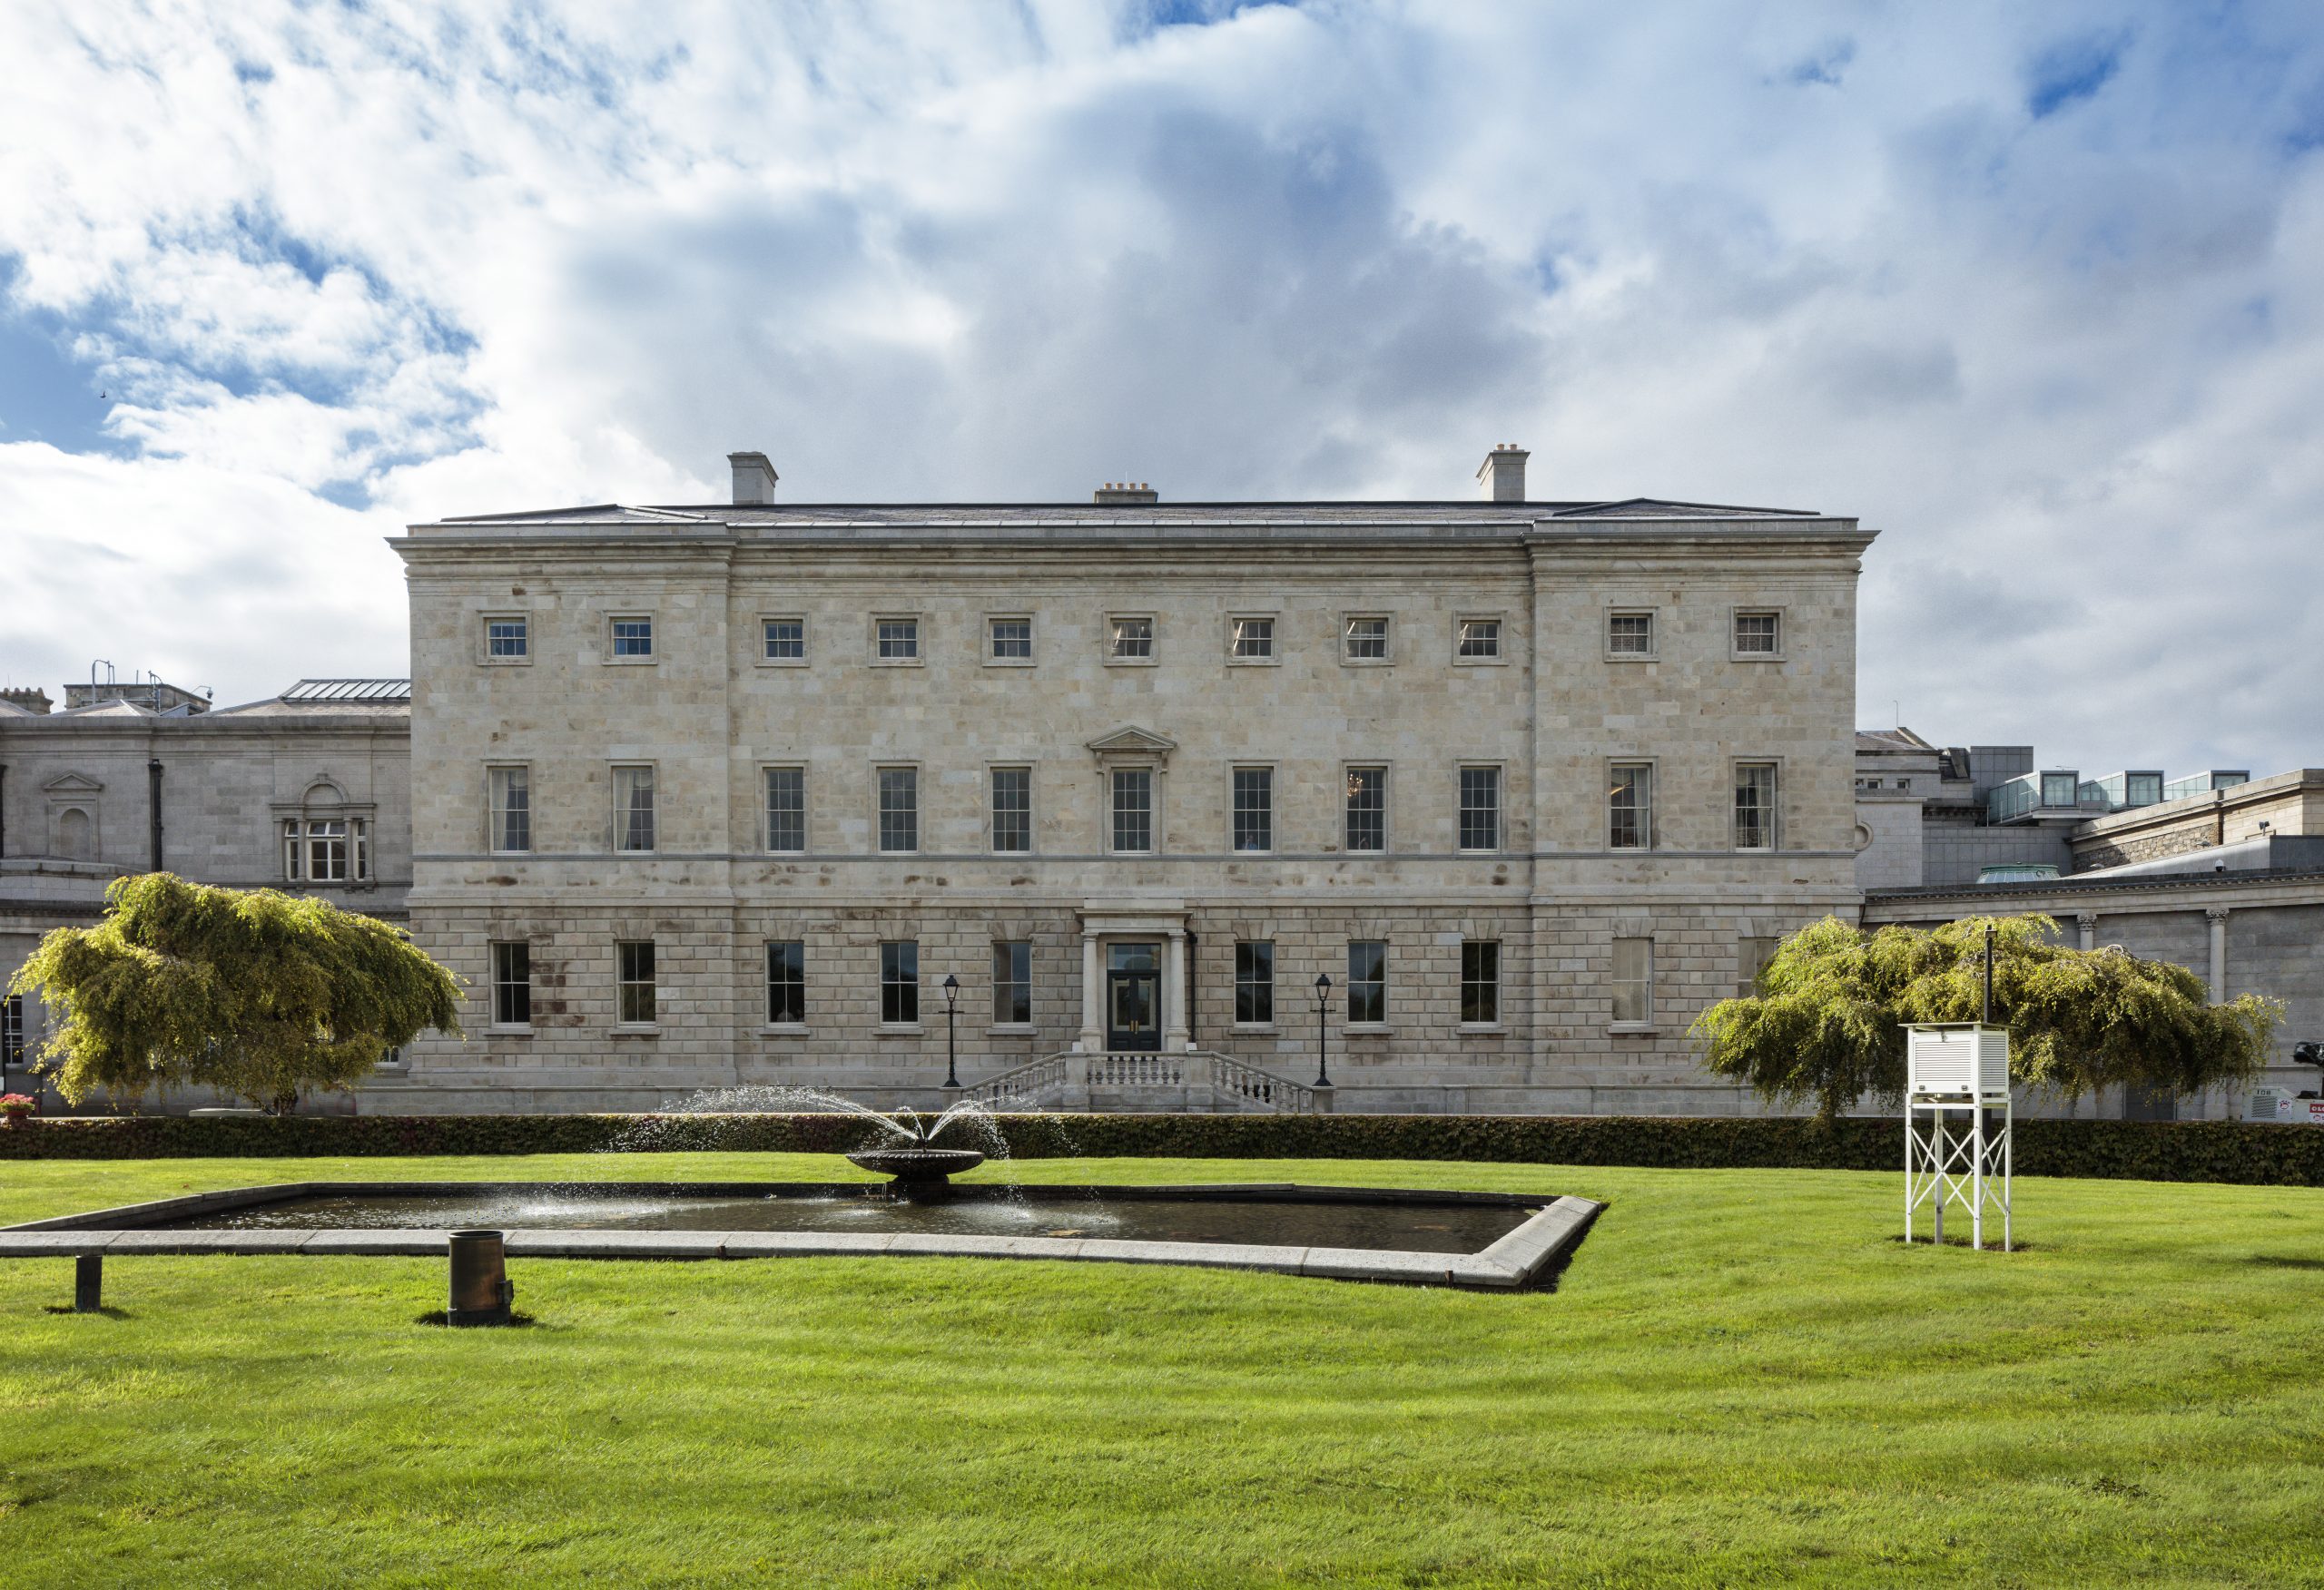 The Restoration And Conservation Of The Historic Leinster House